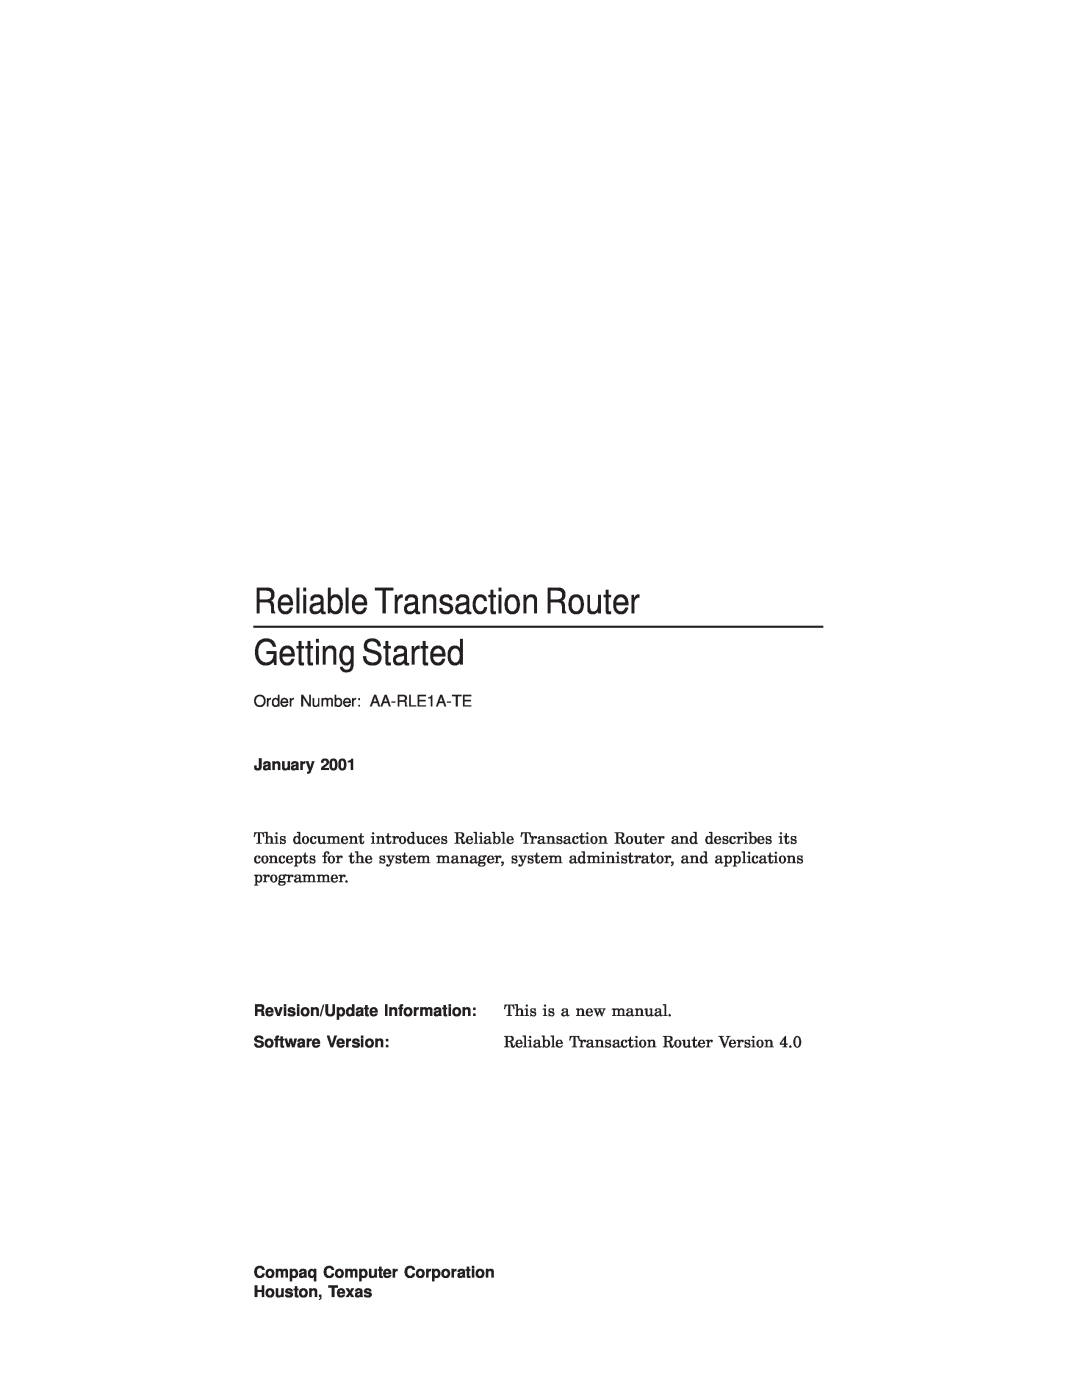 Compaq manual Reliable Transaction Router Getting Started, January, Revision/Update Information This is a new manual 